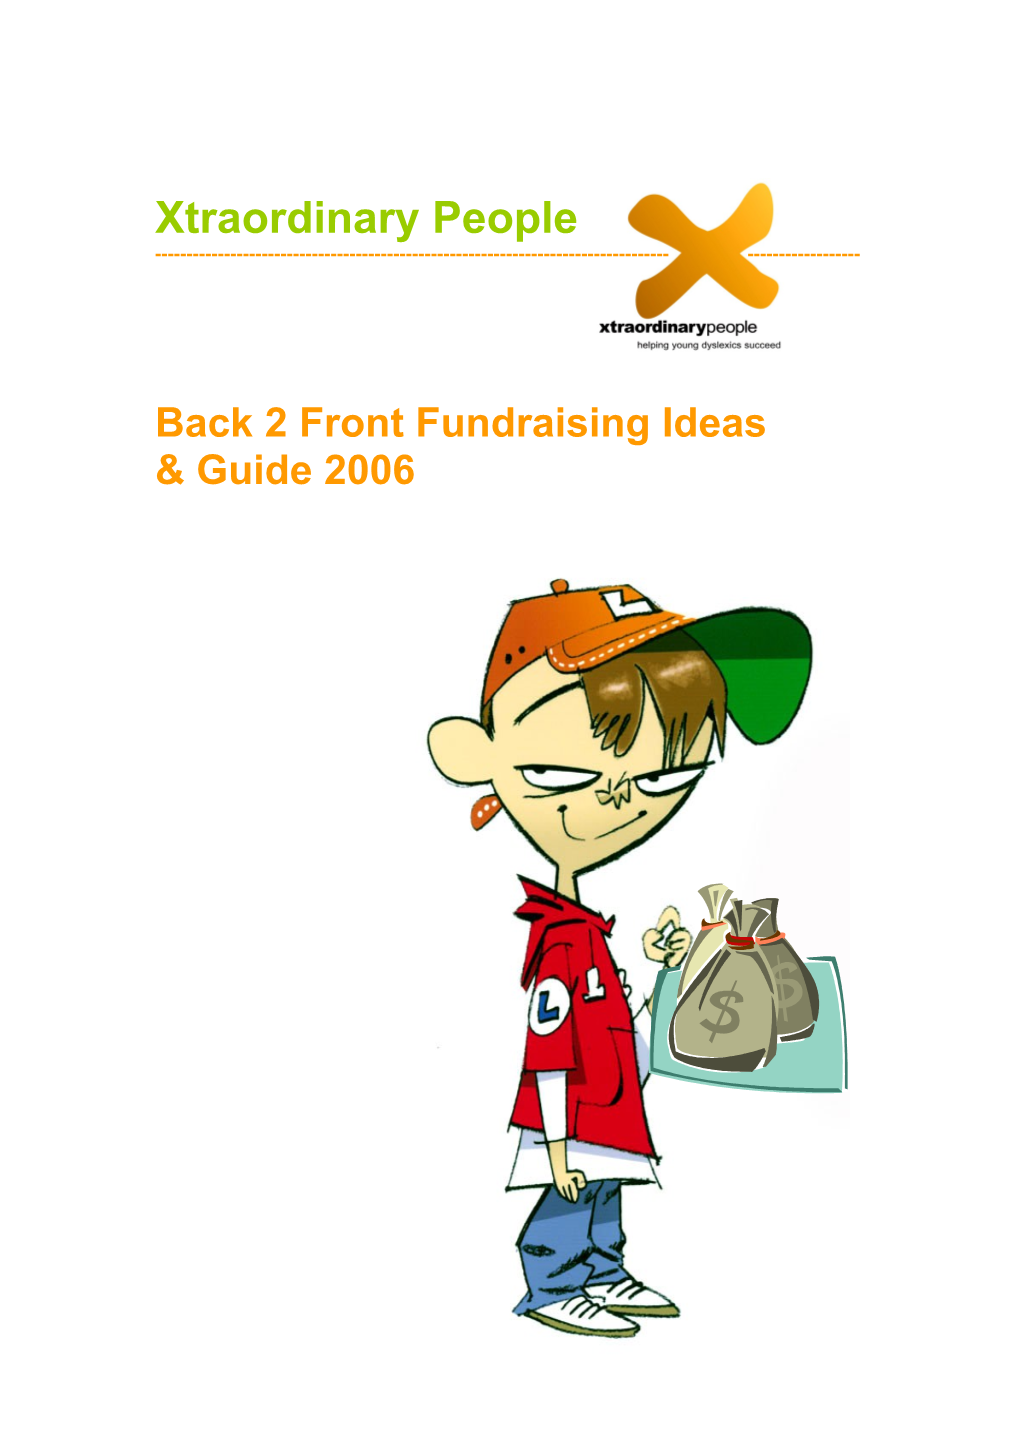 Back 2 Front Fundraising Ideas